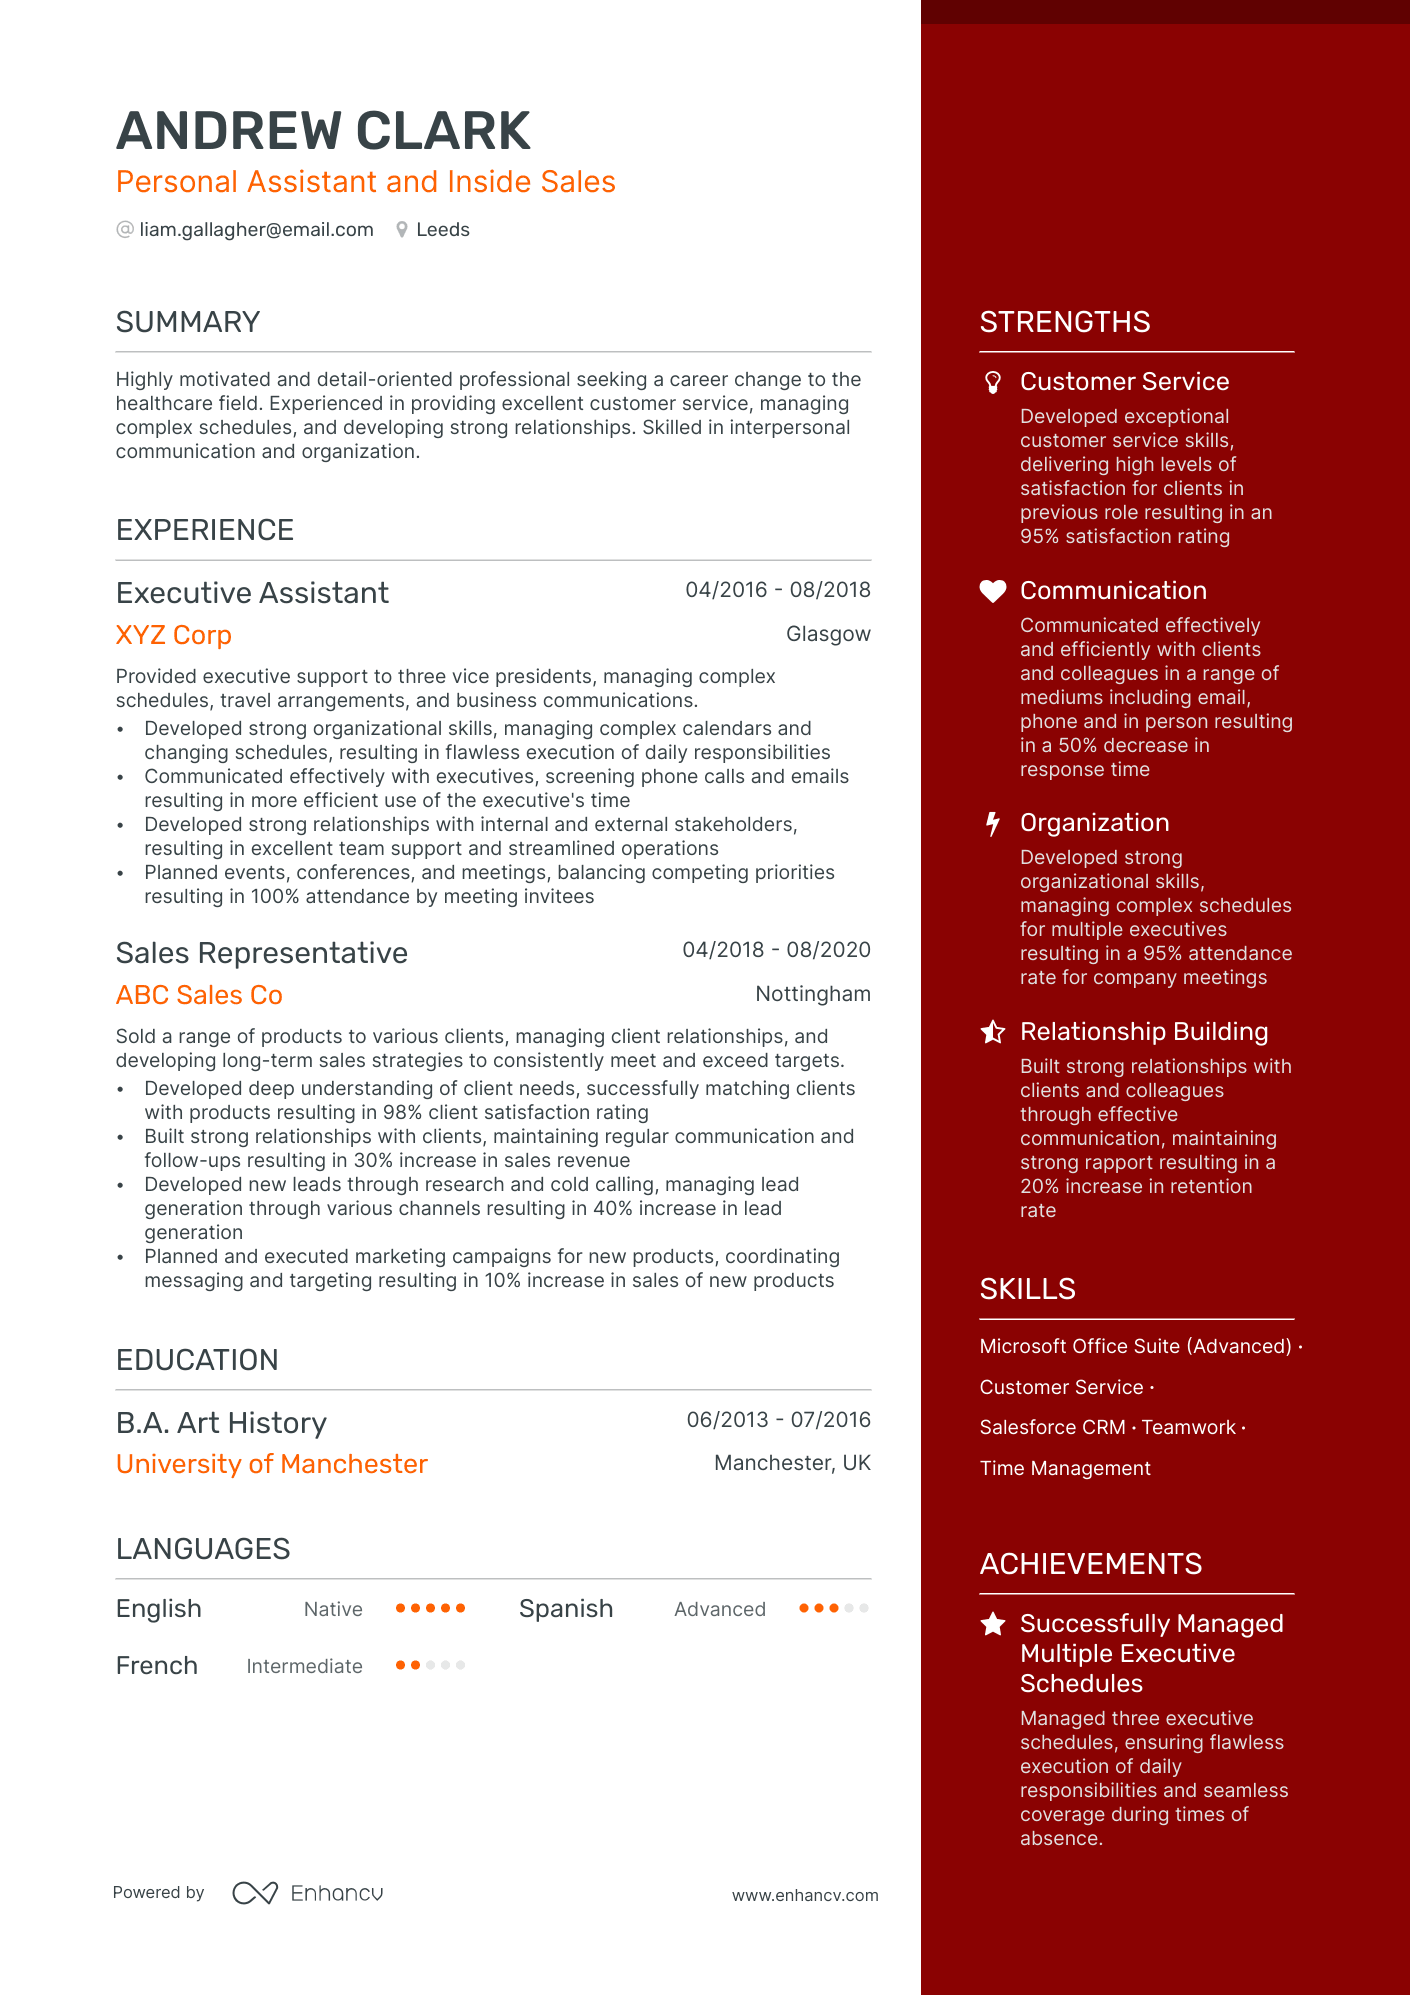 Personal Assistant and Inside Sales CV example